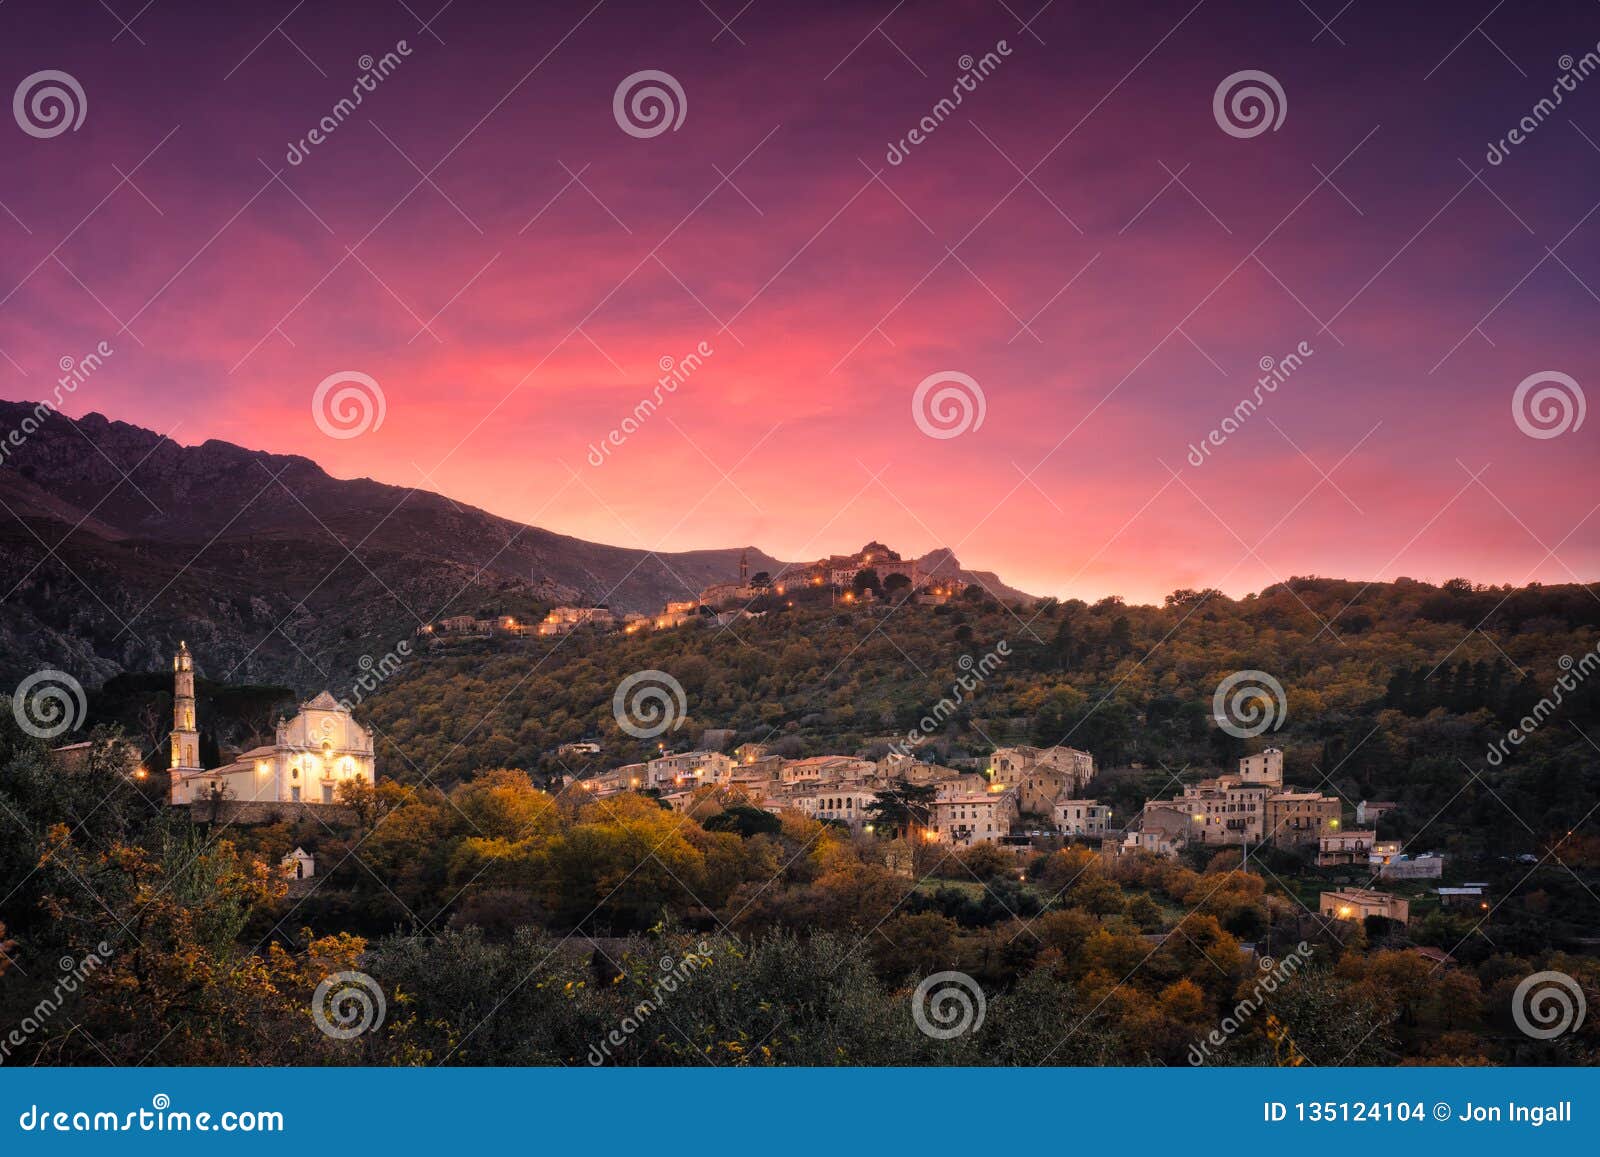 sunset over mountain villages in corsica